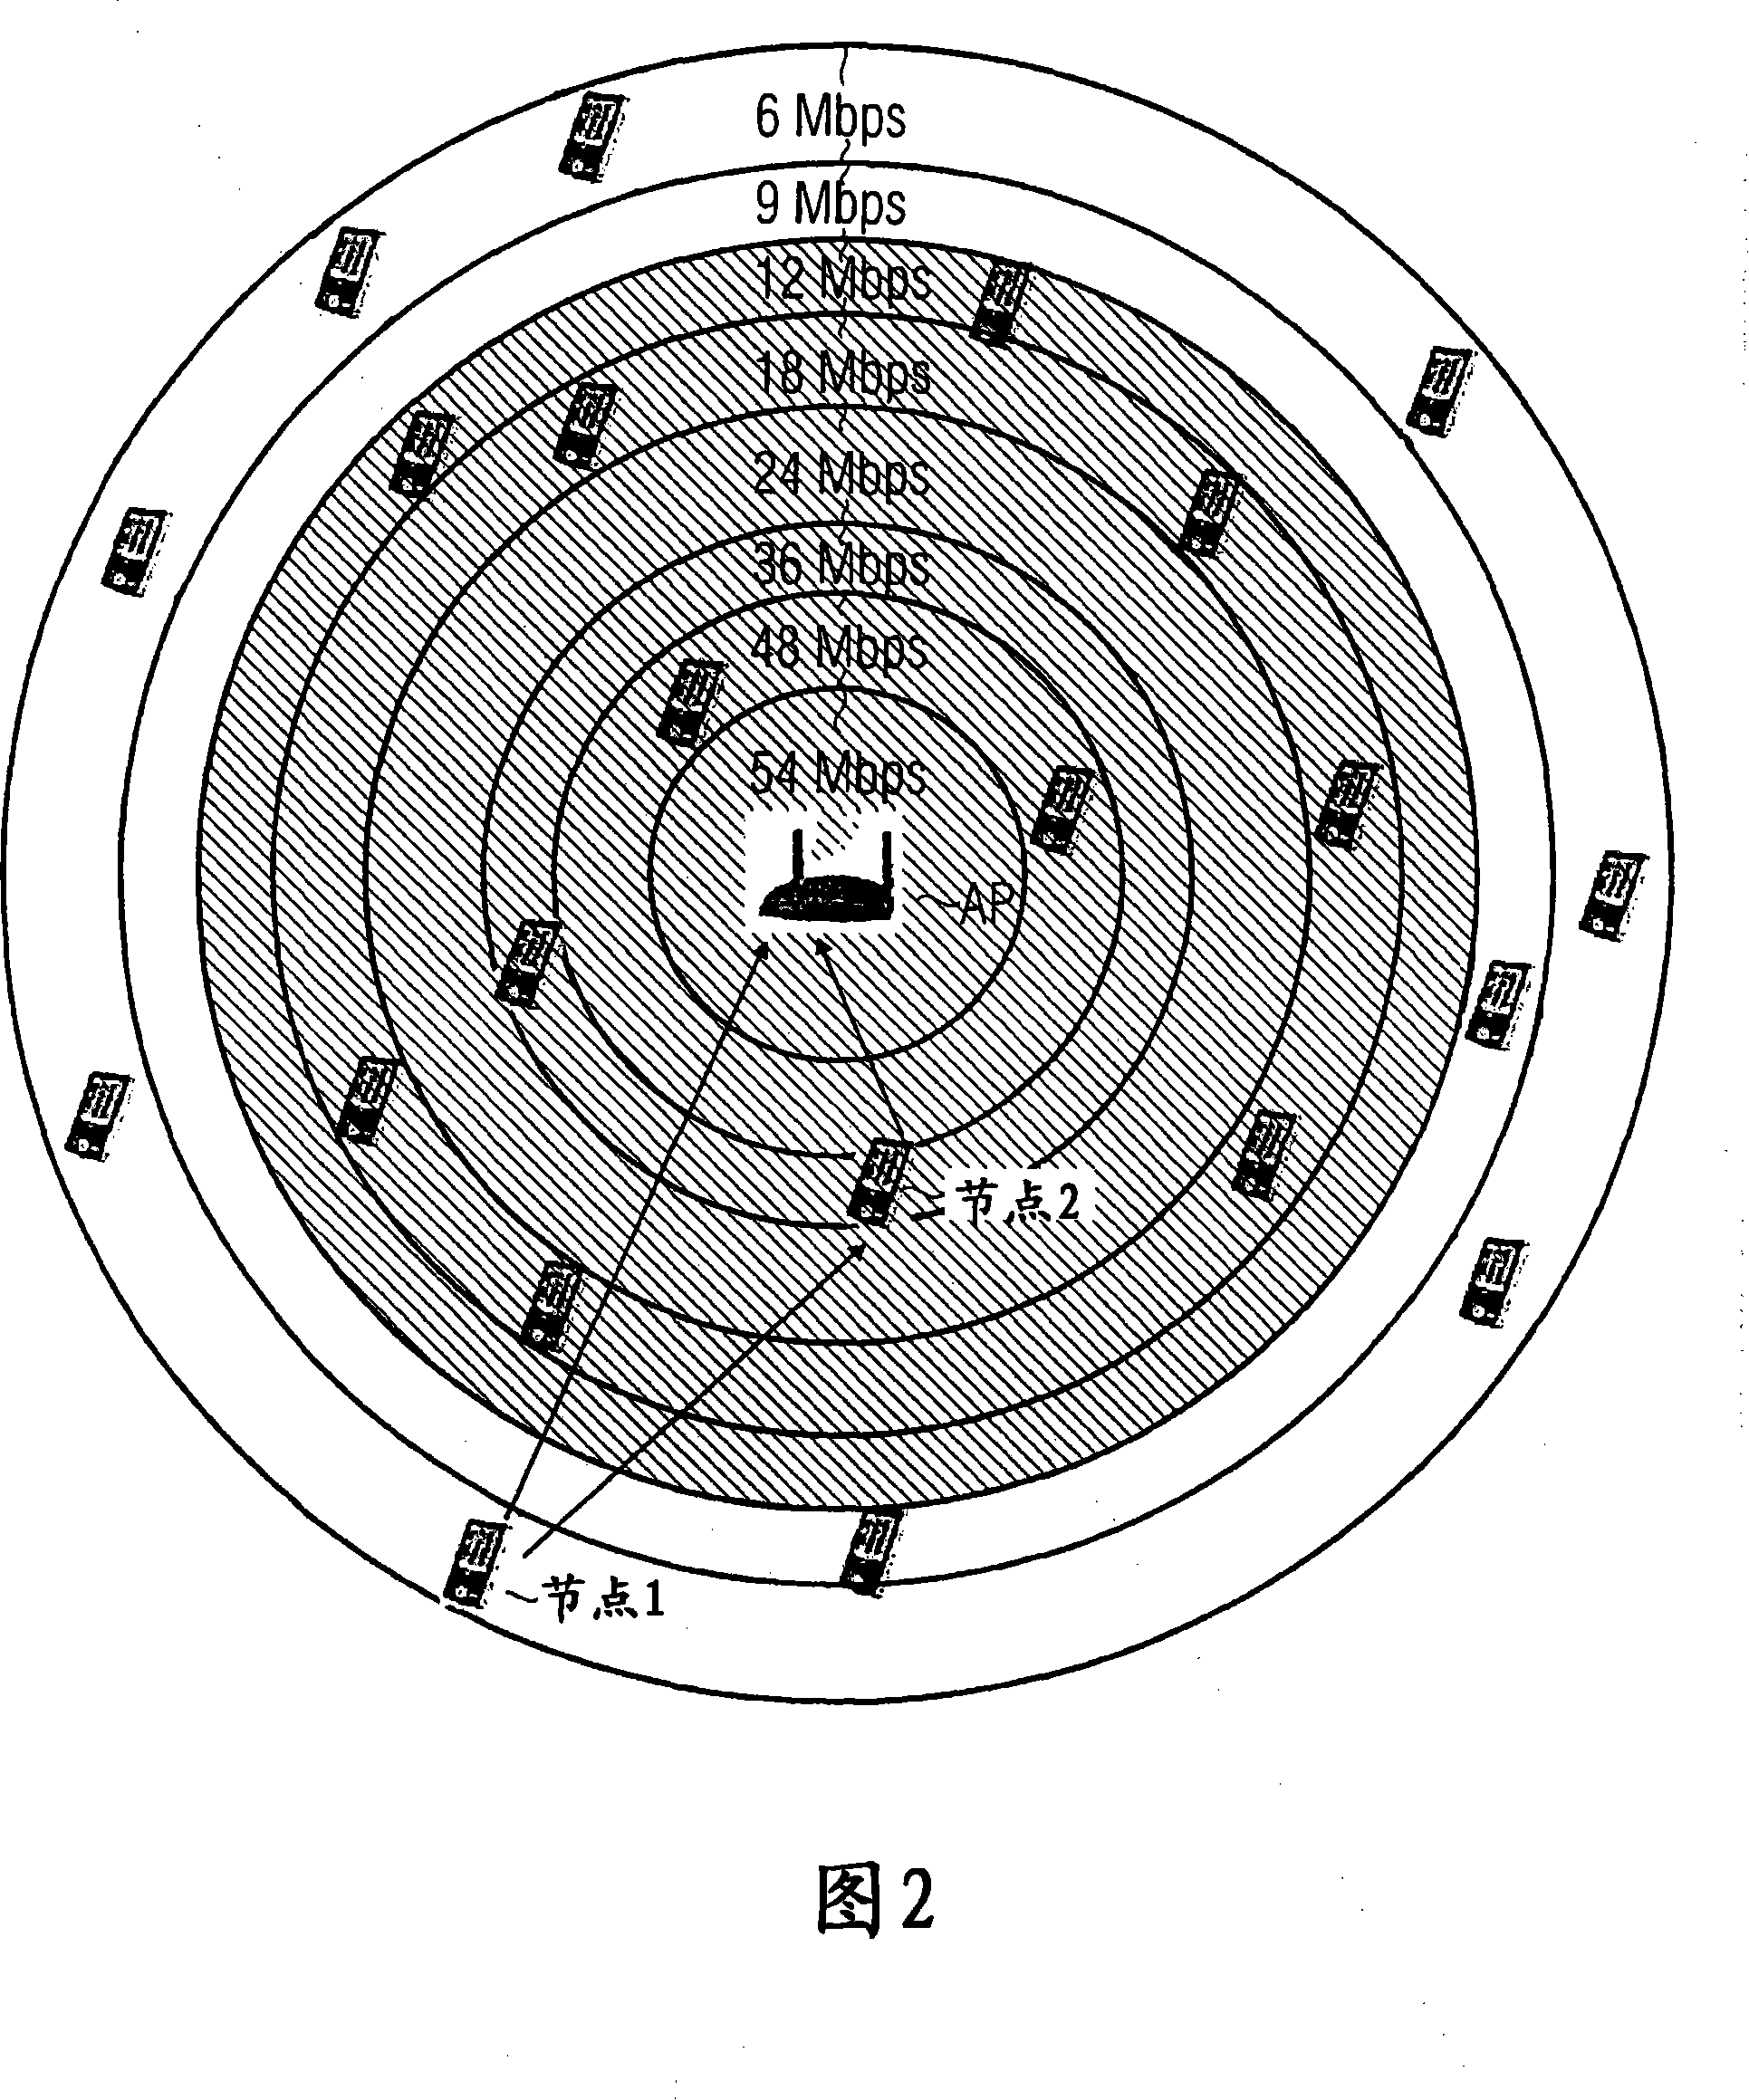 Relay apparatus for relaying a data packet